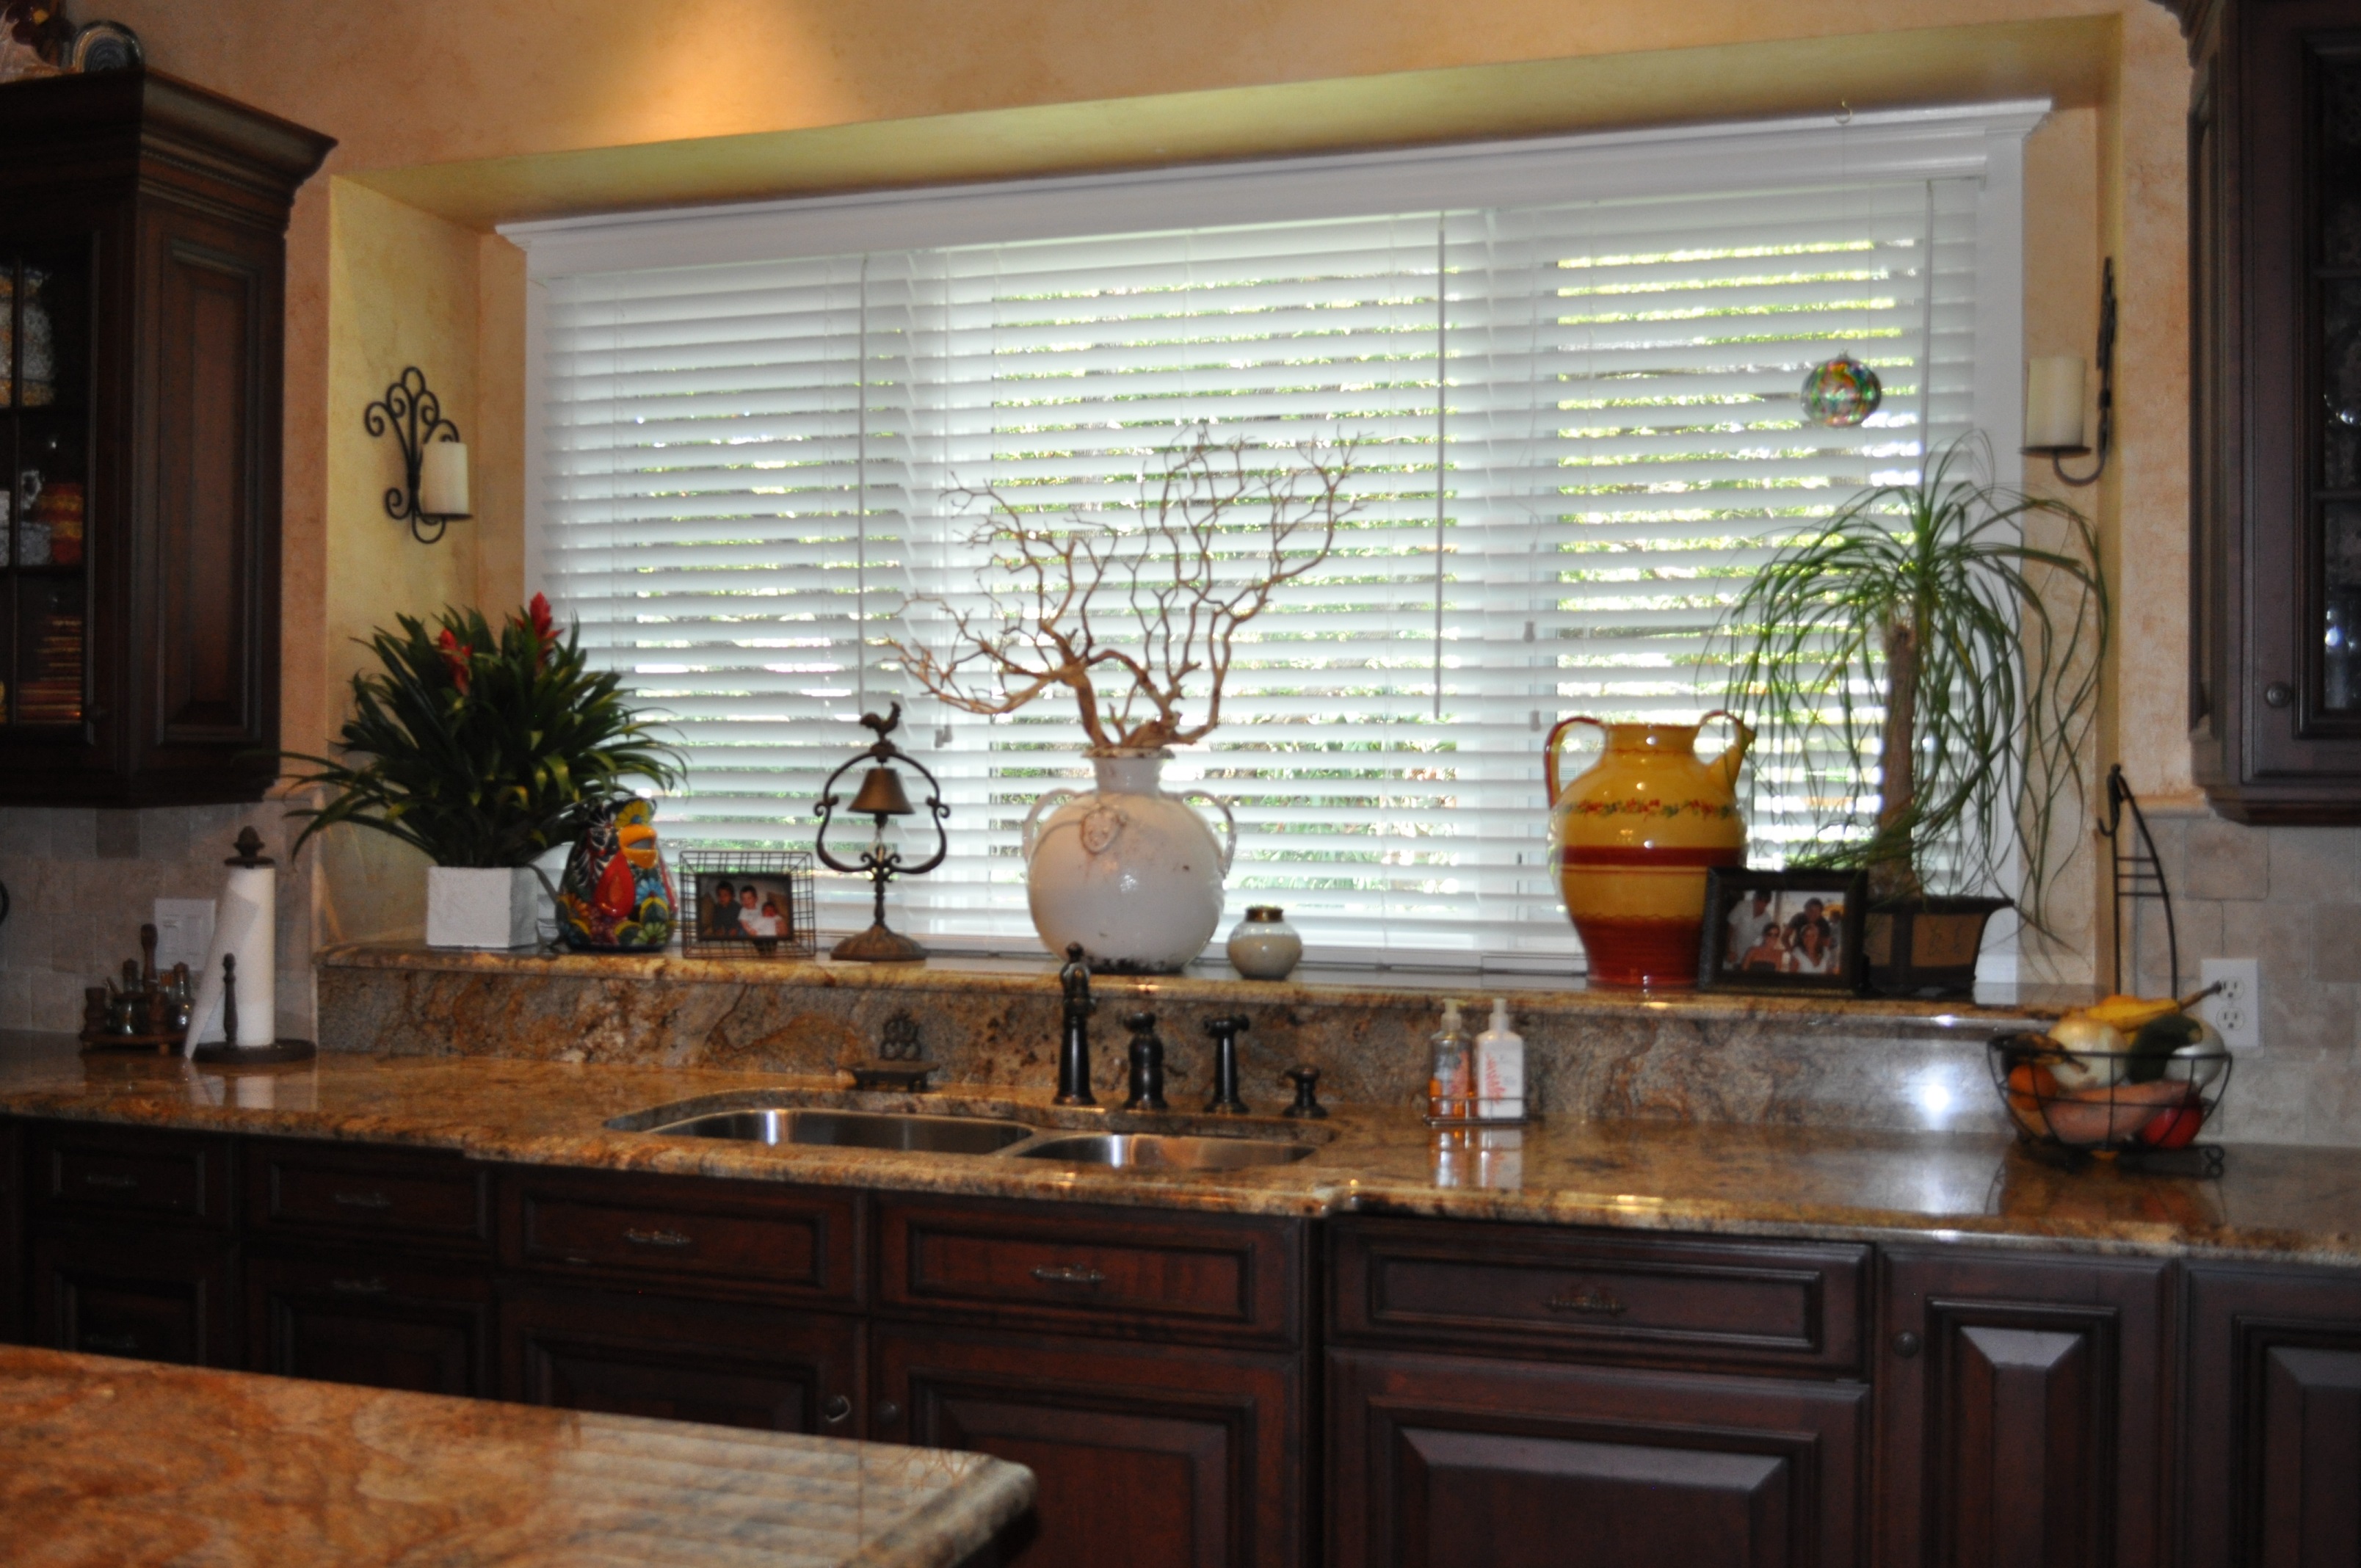 plantation shutters Wedgefield, window blinds, roller shades